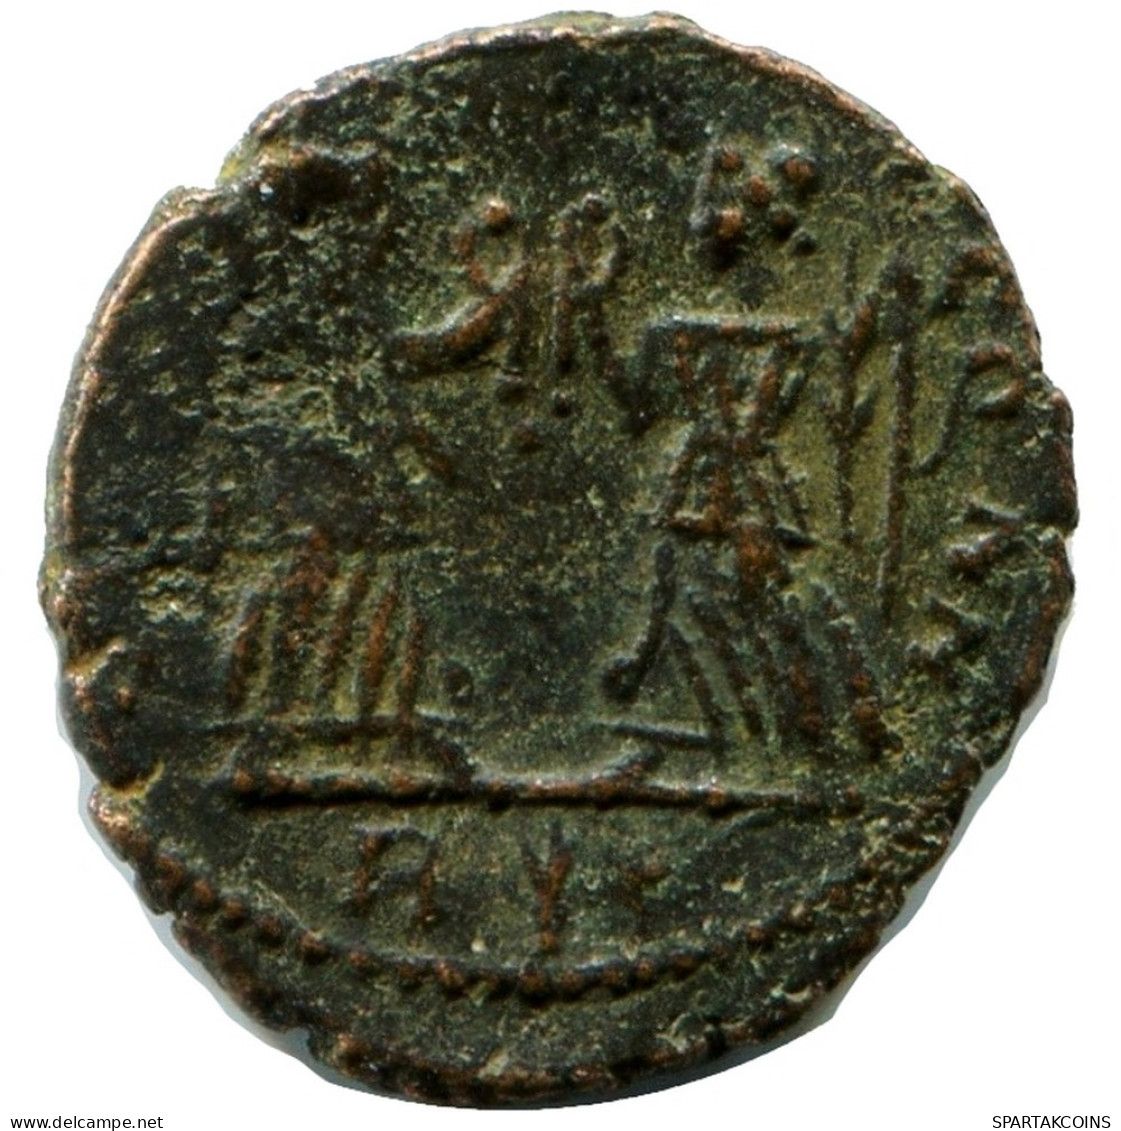 CONSTANS MINTED IN ROME ITALY FOUND IN IHNASYAH HOARD EGYPT #ANC11540.14.D.A - El Impero Christiano (307 / 363)